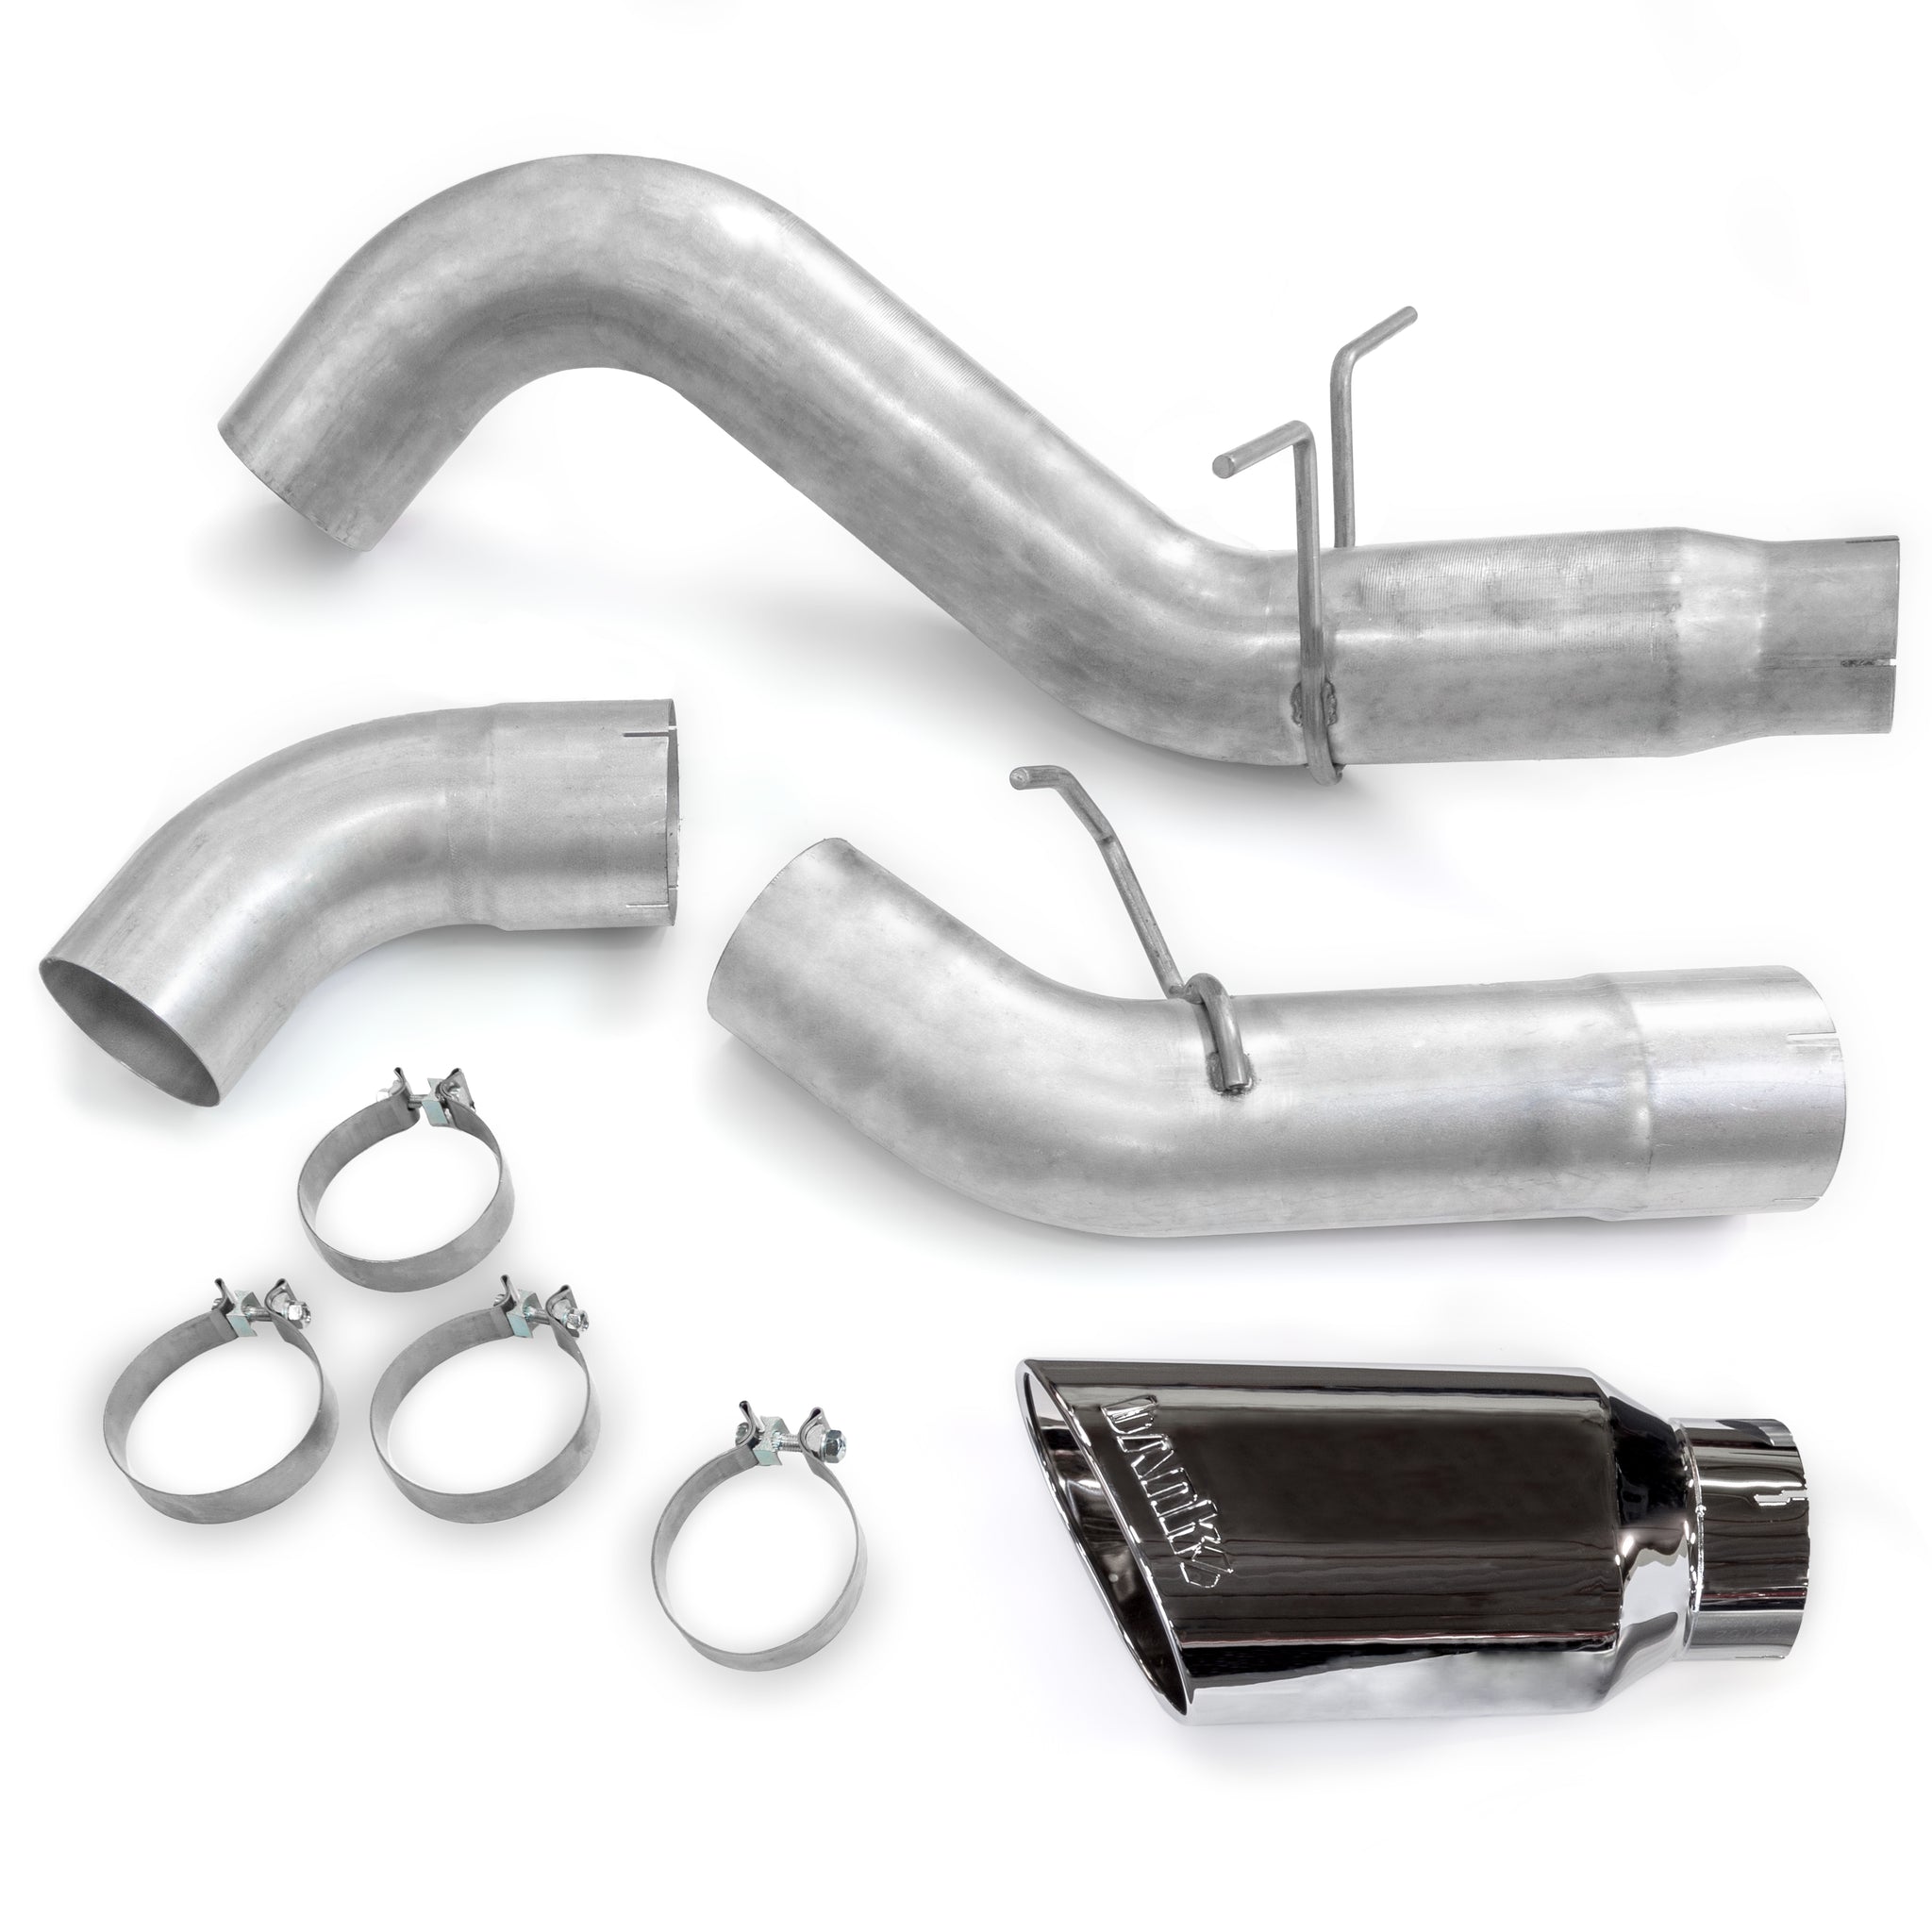 Components used in Banks Power Monster Exhaust for 2011-2016 GM 2500/3500 LML Dual Rear Wheel